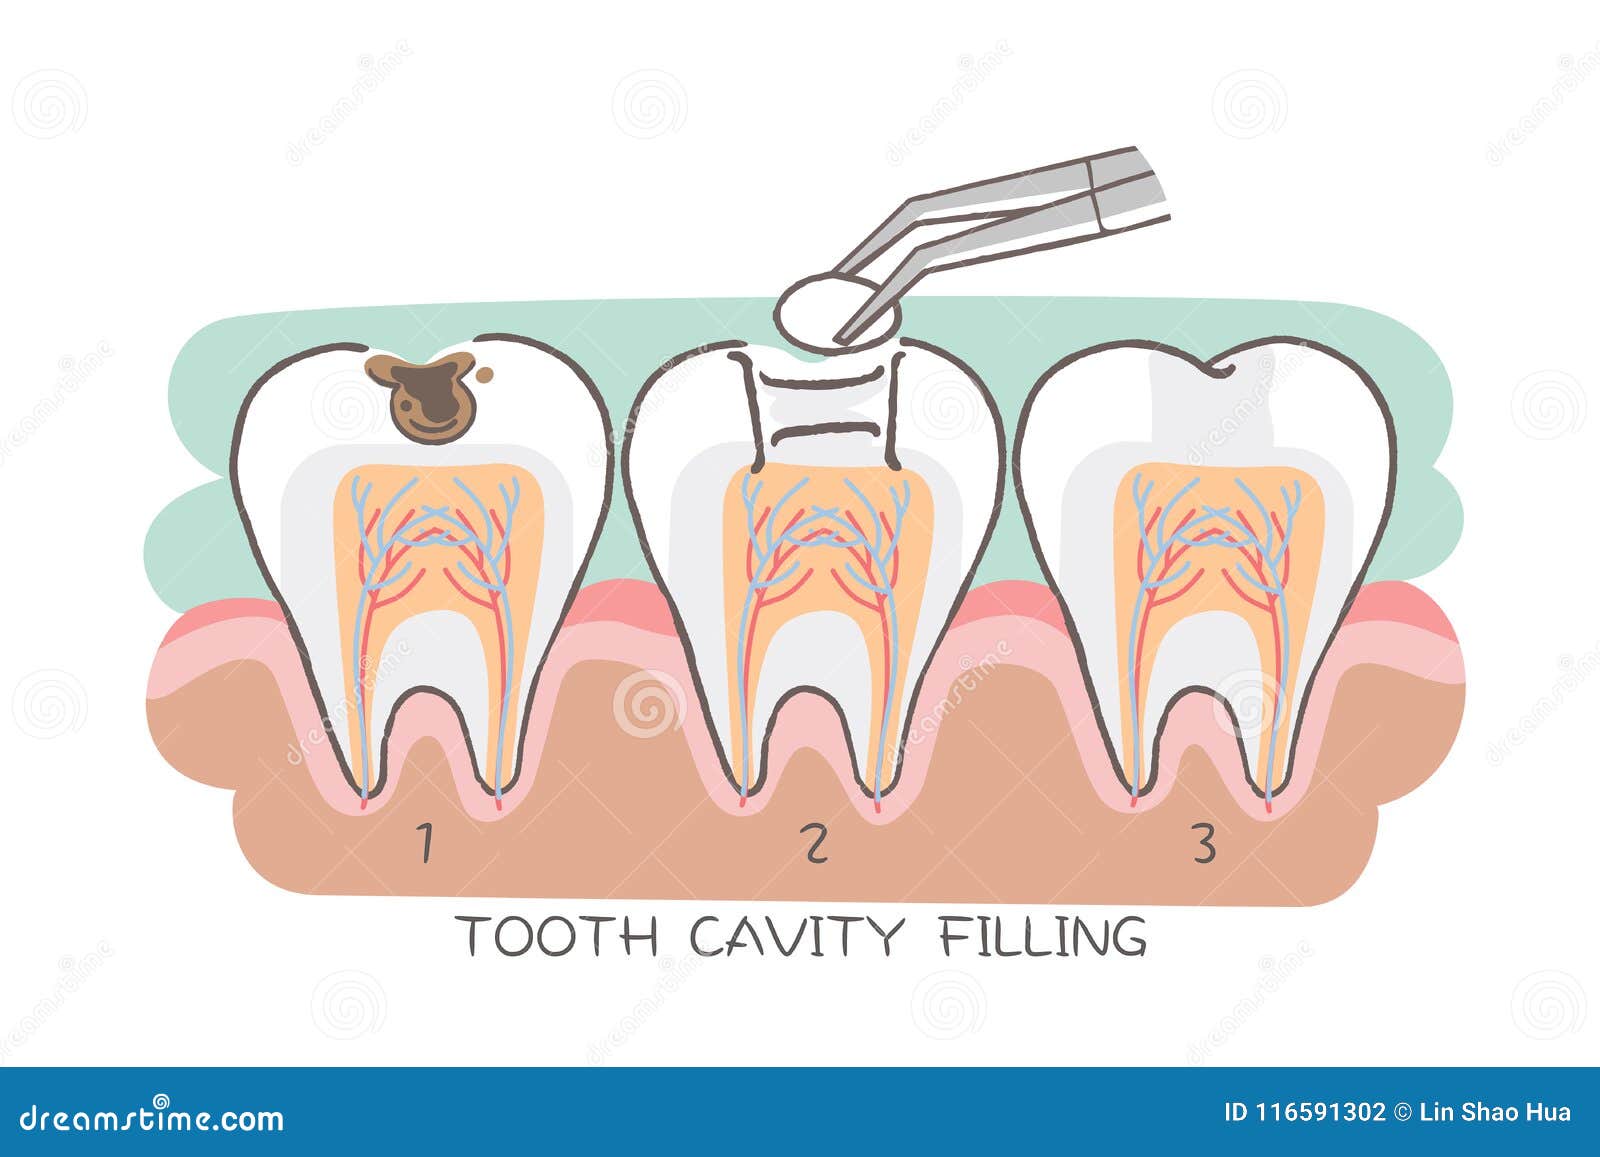 tooth cavity filling